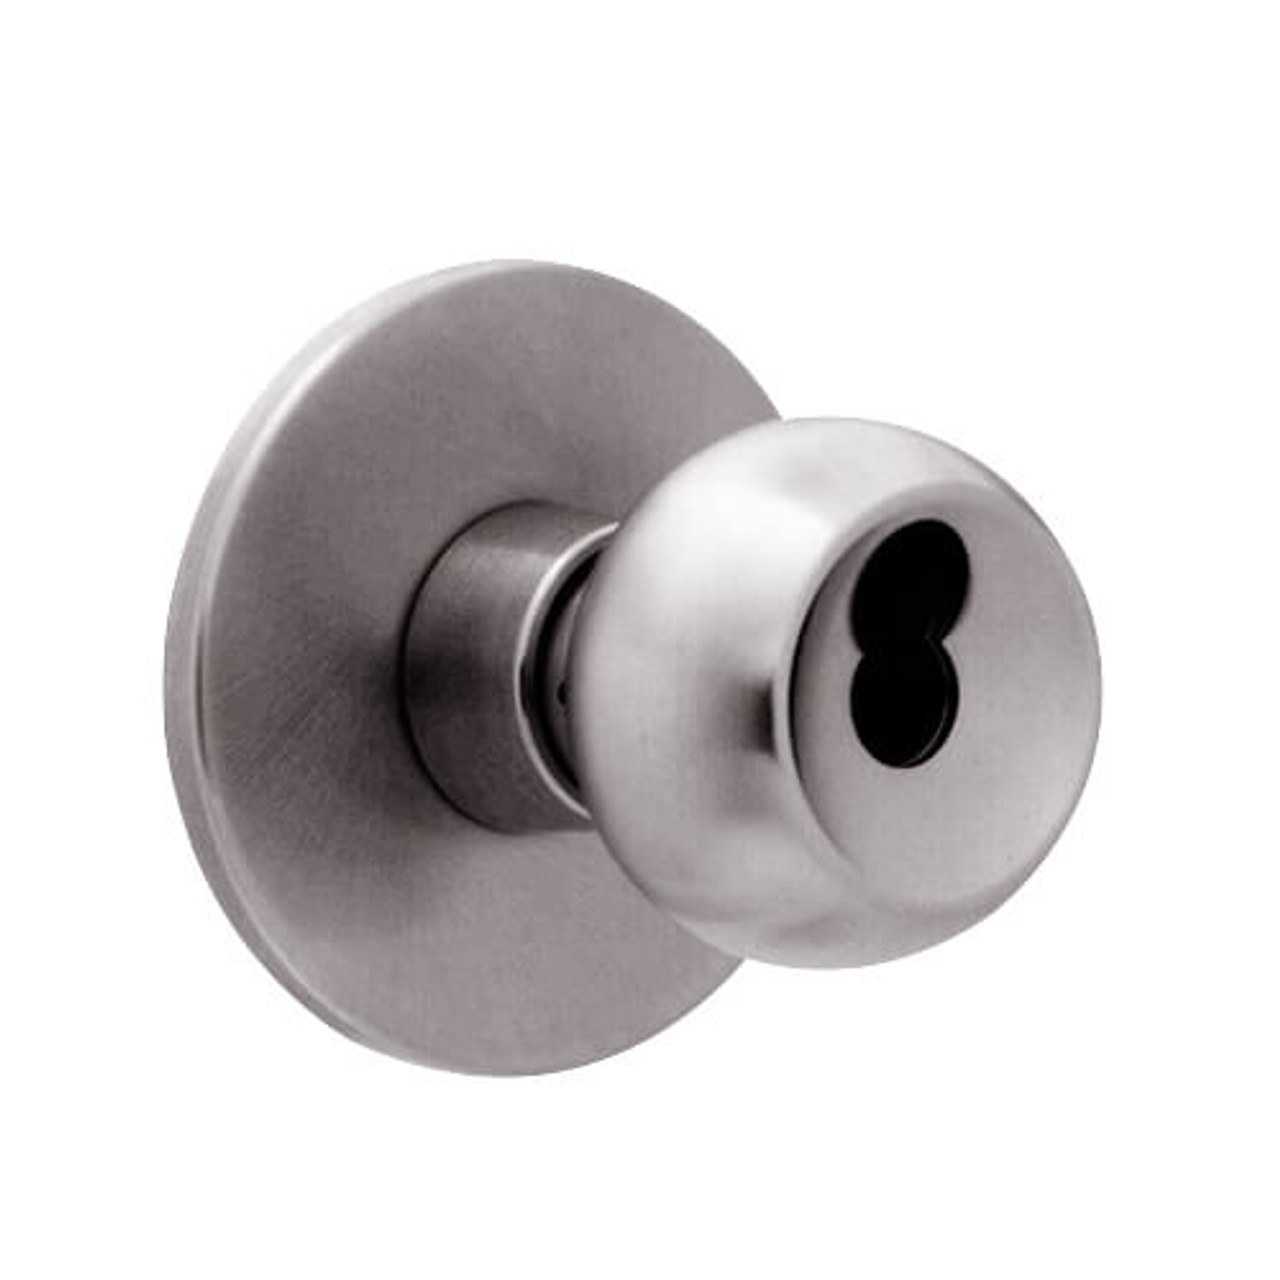 X571BD-TY-630 Falcon X Series Cylindrical Dormitory Lock with Troy-York Knob Style in Satin Stainless Finish